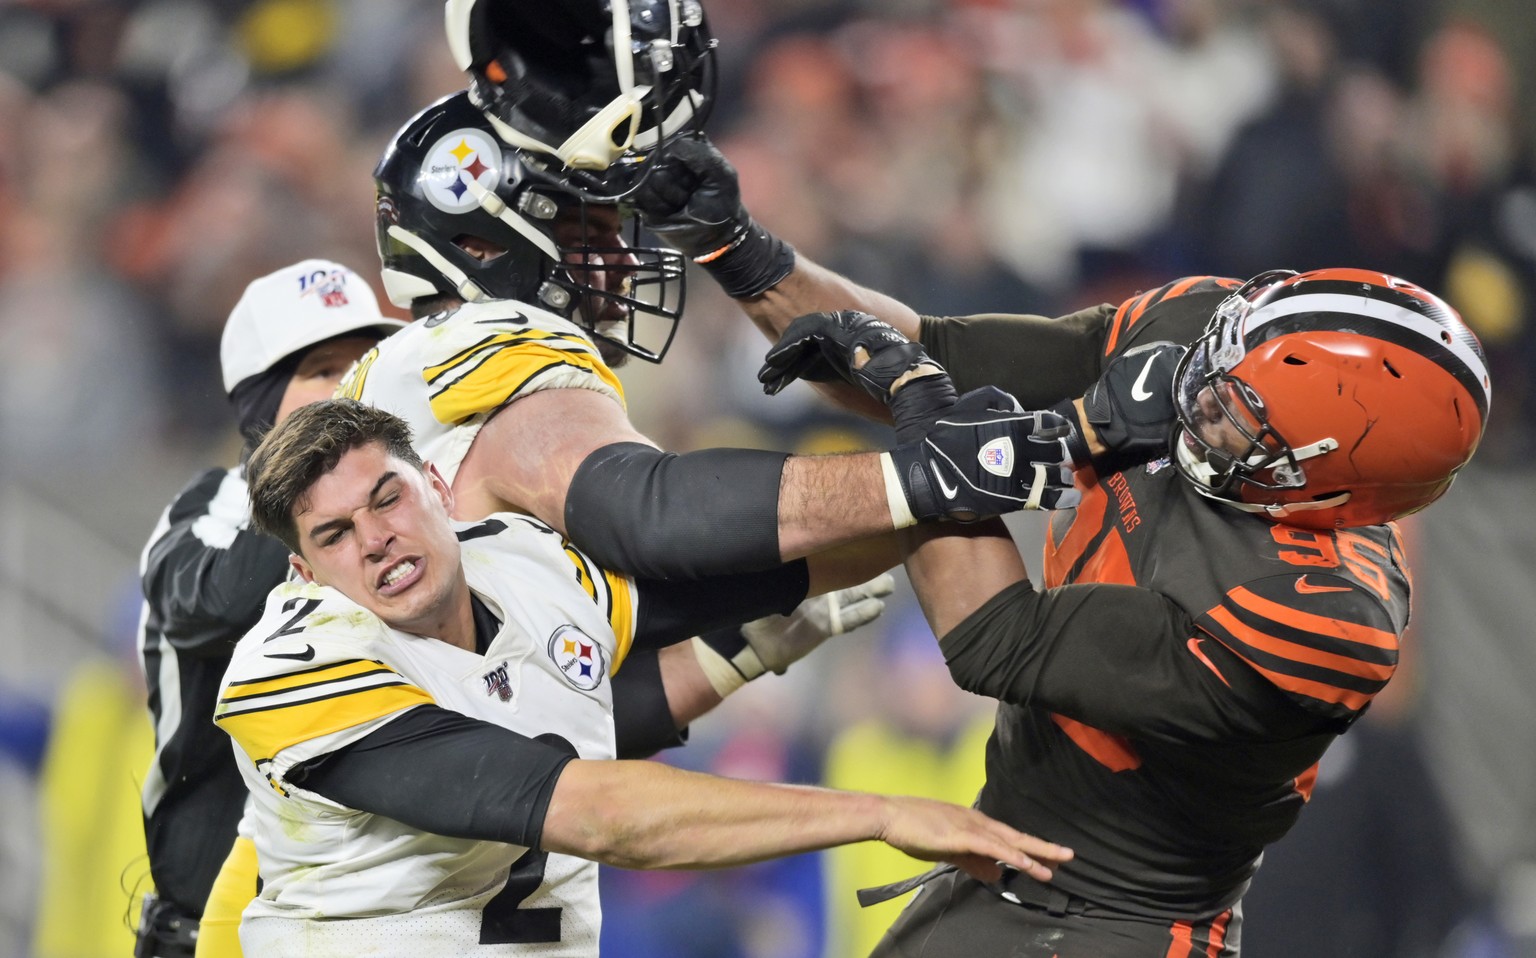 Cleveland Browns defensive end Myles Garrett (95) hits Pittsburgh Steelers quarterback Mason Rudolph (2) with a helmet during the second half of an NFL football game Thursday, Nov. 14, 2019, in Clevel ...